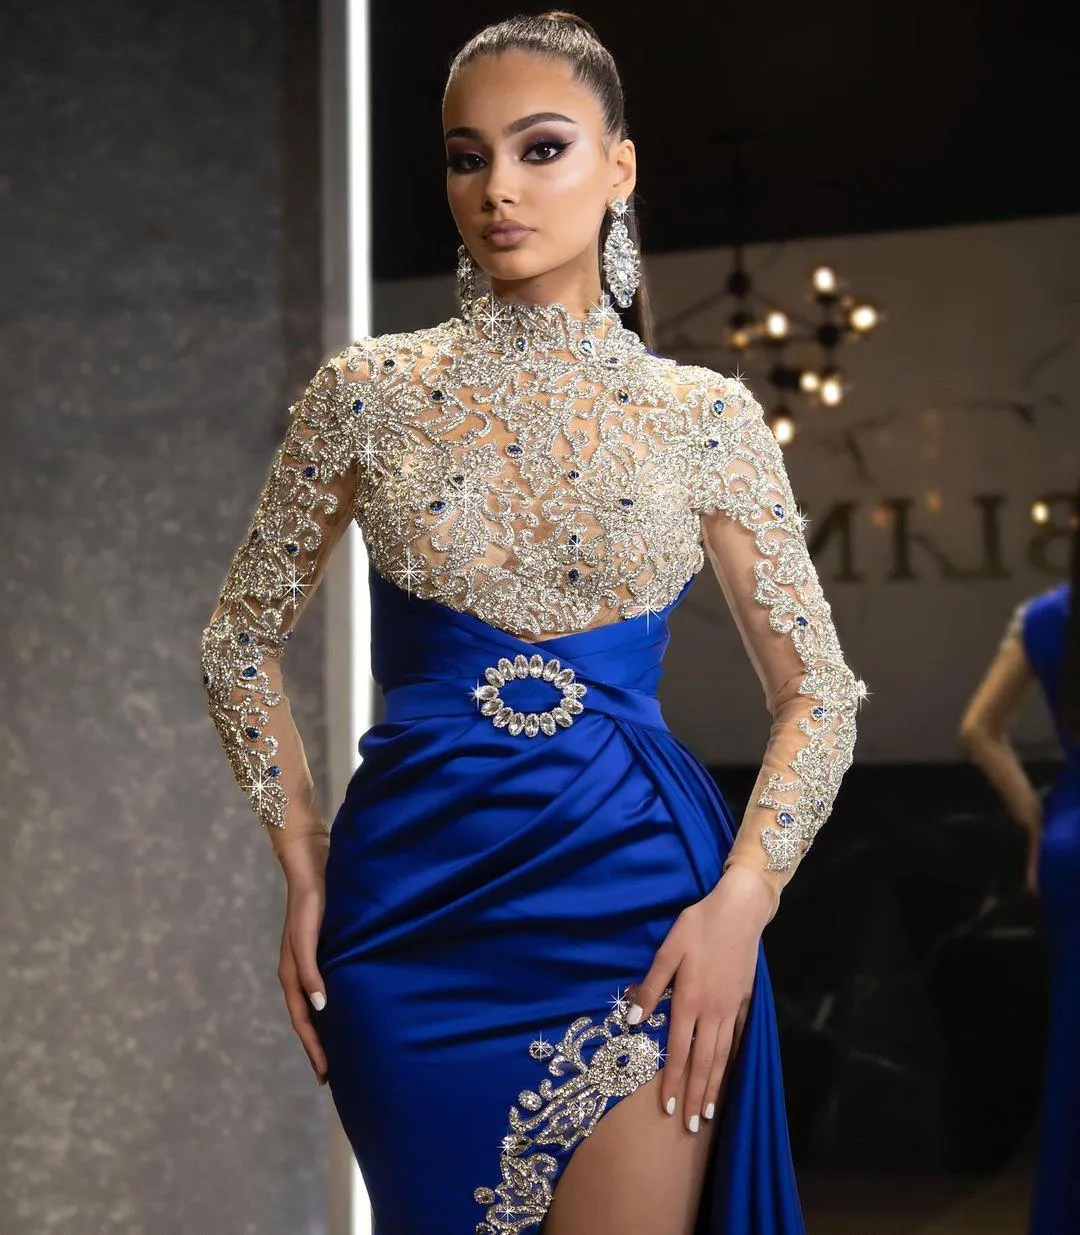 Vintage High Neck Evening Dresses Luxury Beaded Crystals Illusion Bodice Long Sleeves Split Formal Party Occasion Prom Gowns Arbaic Dubai Dress BC11420 0419